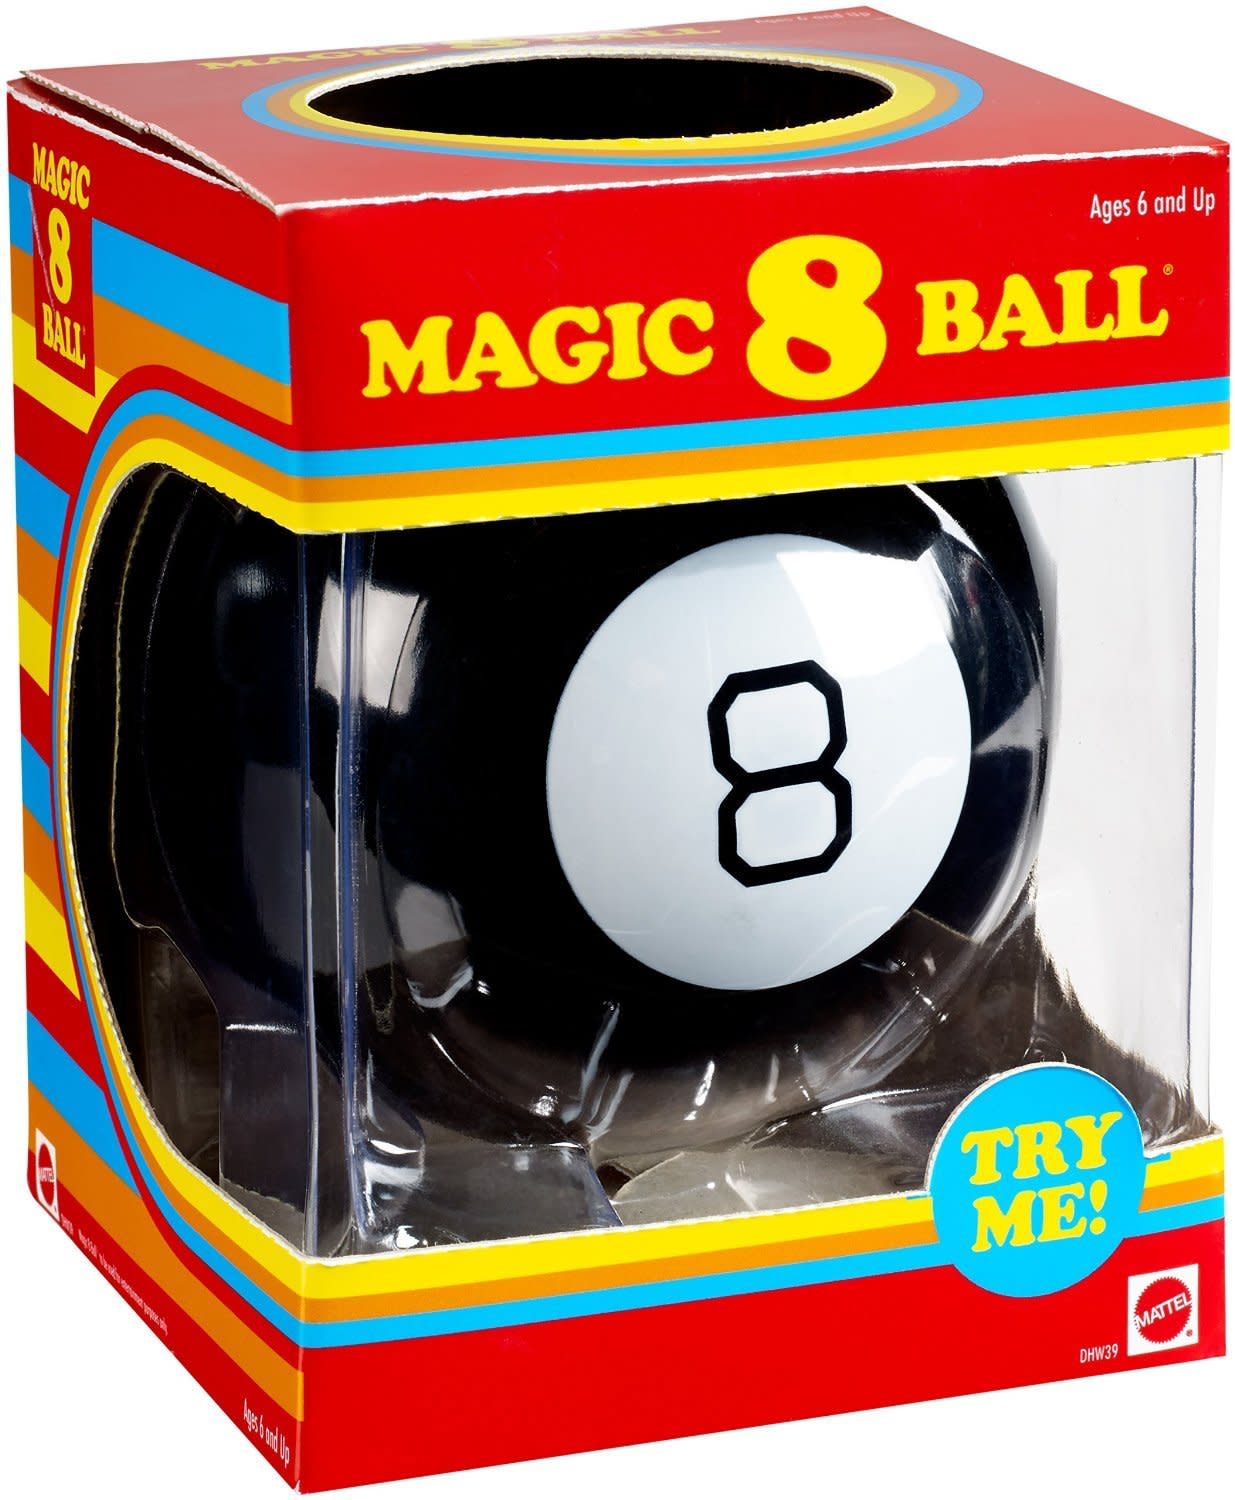 Magic 8 Ball in package